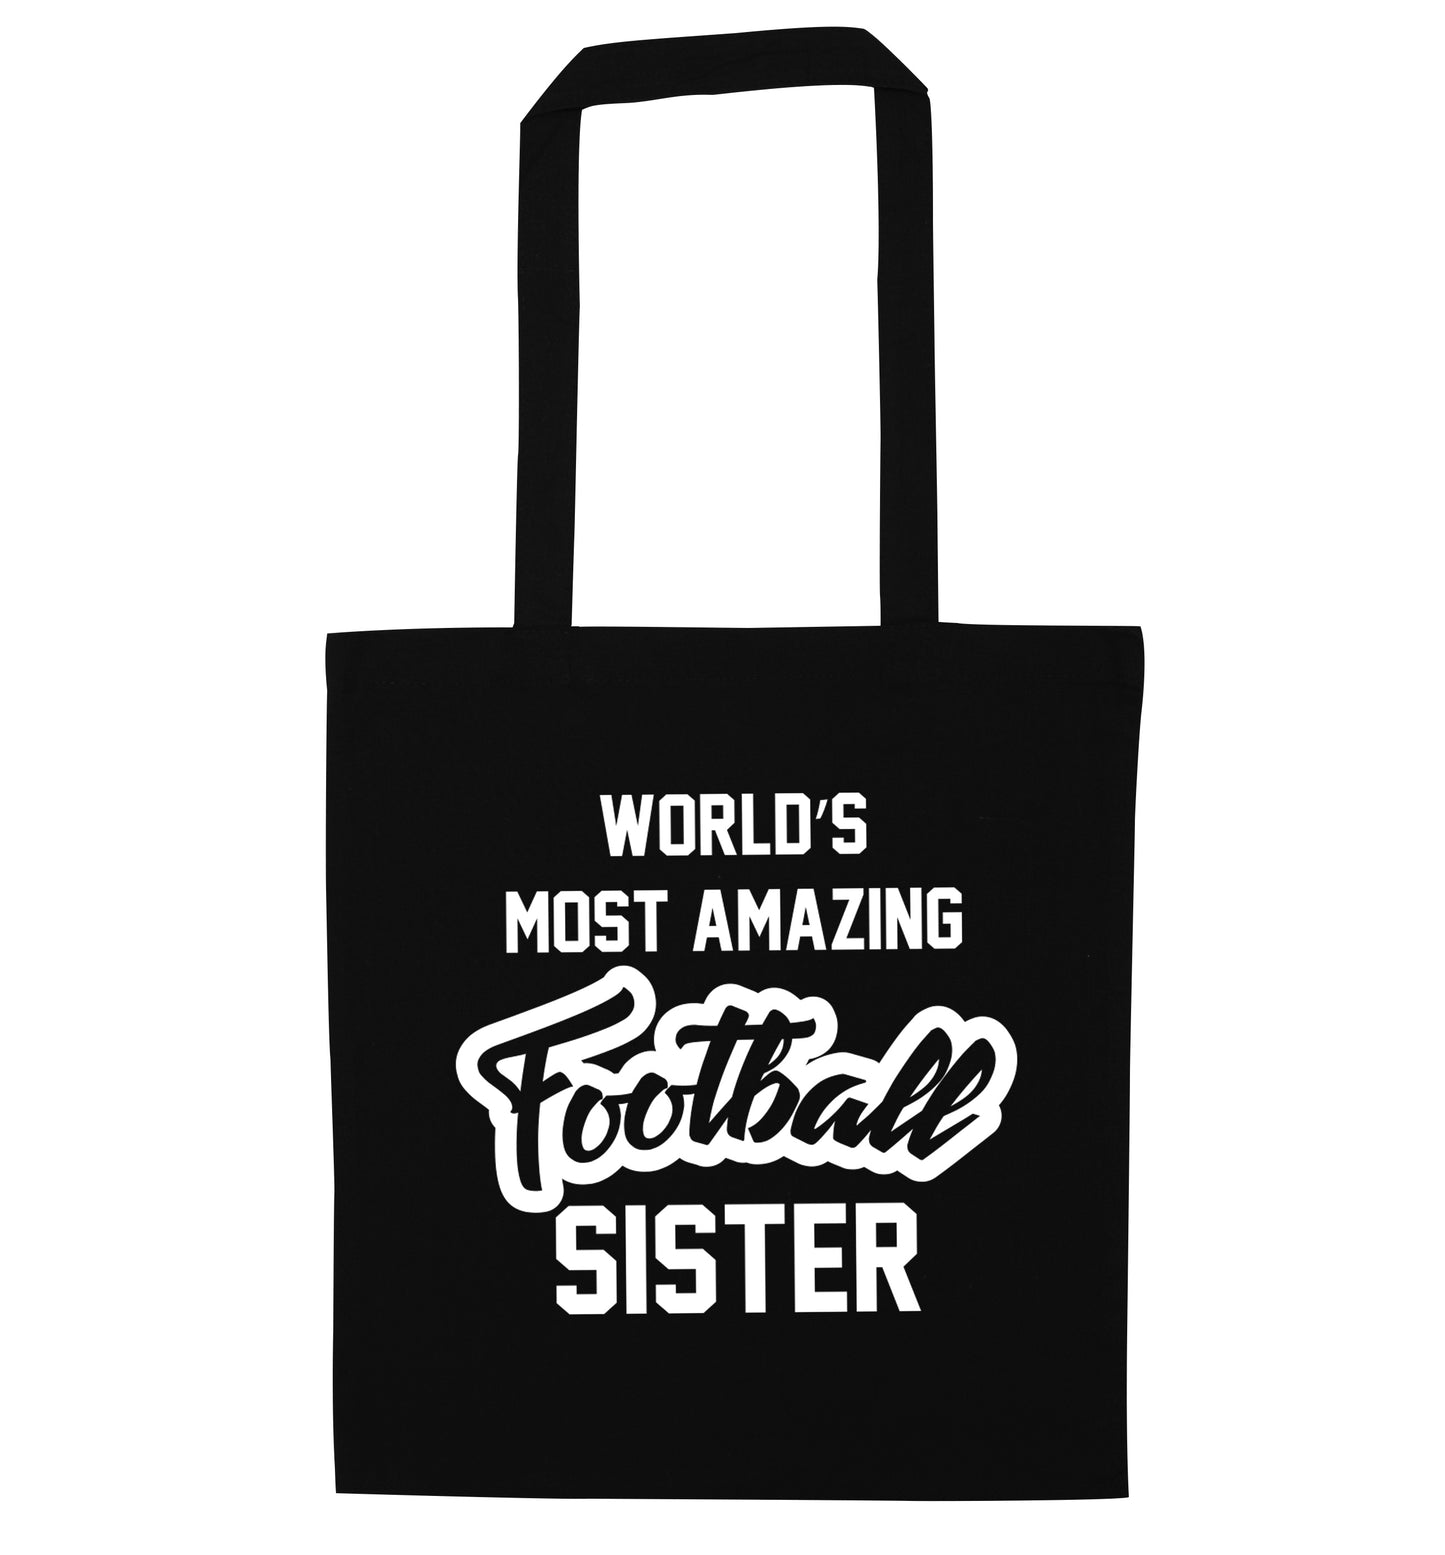 Worlds most amazing football sister black tote bag